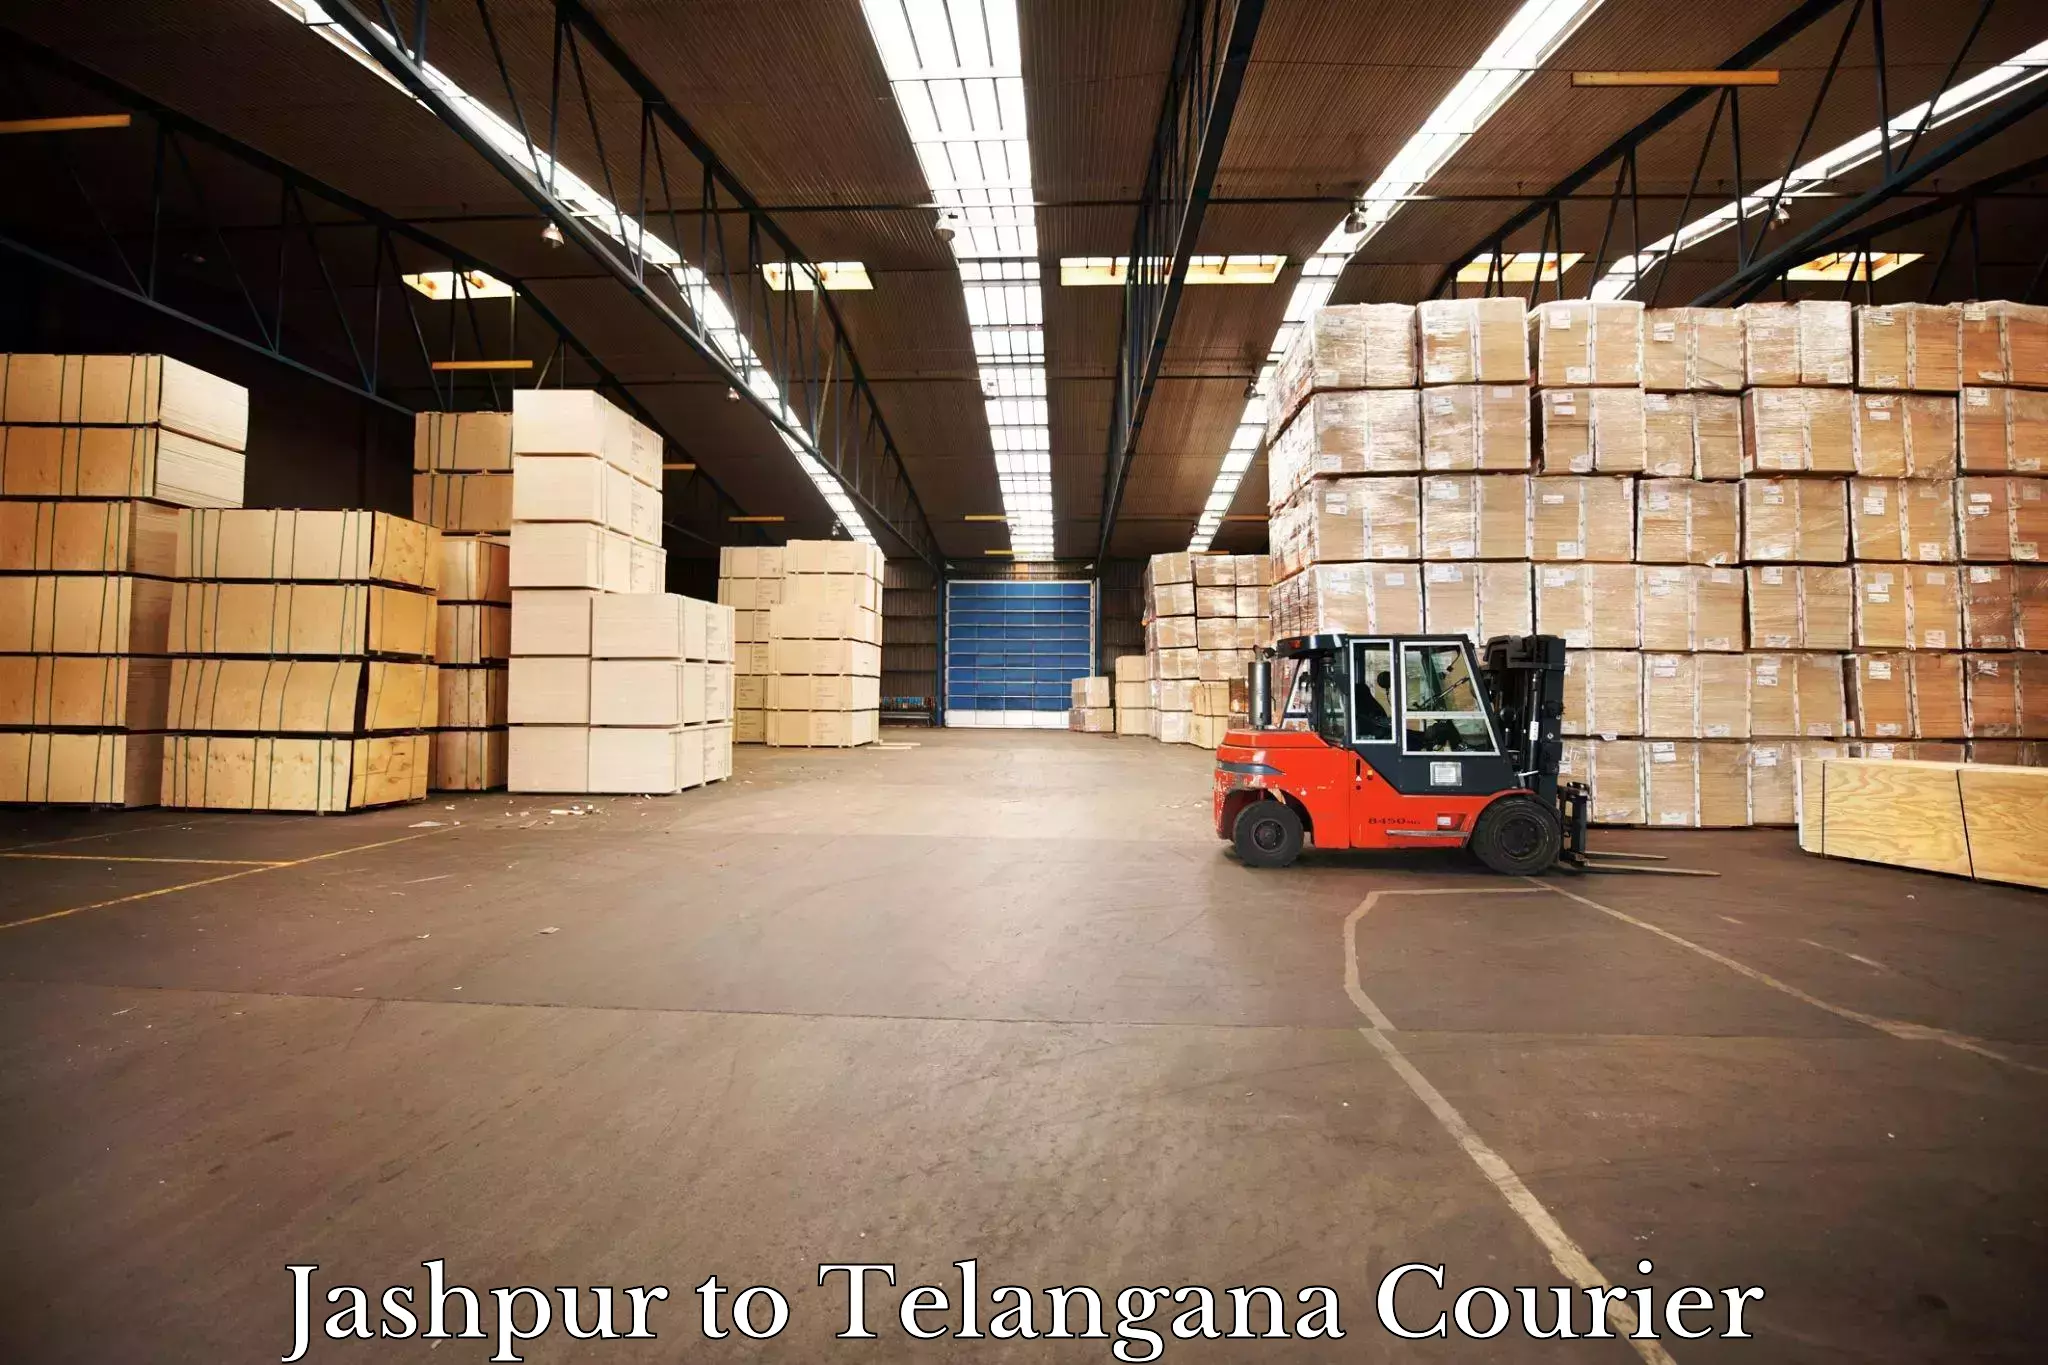 Global shipping solutions Jashpur to Hyderabad